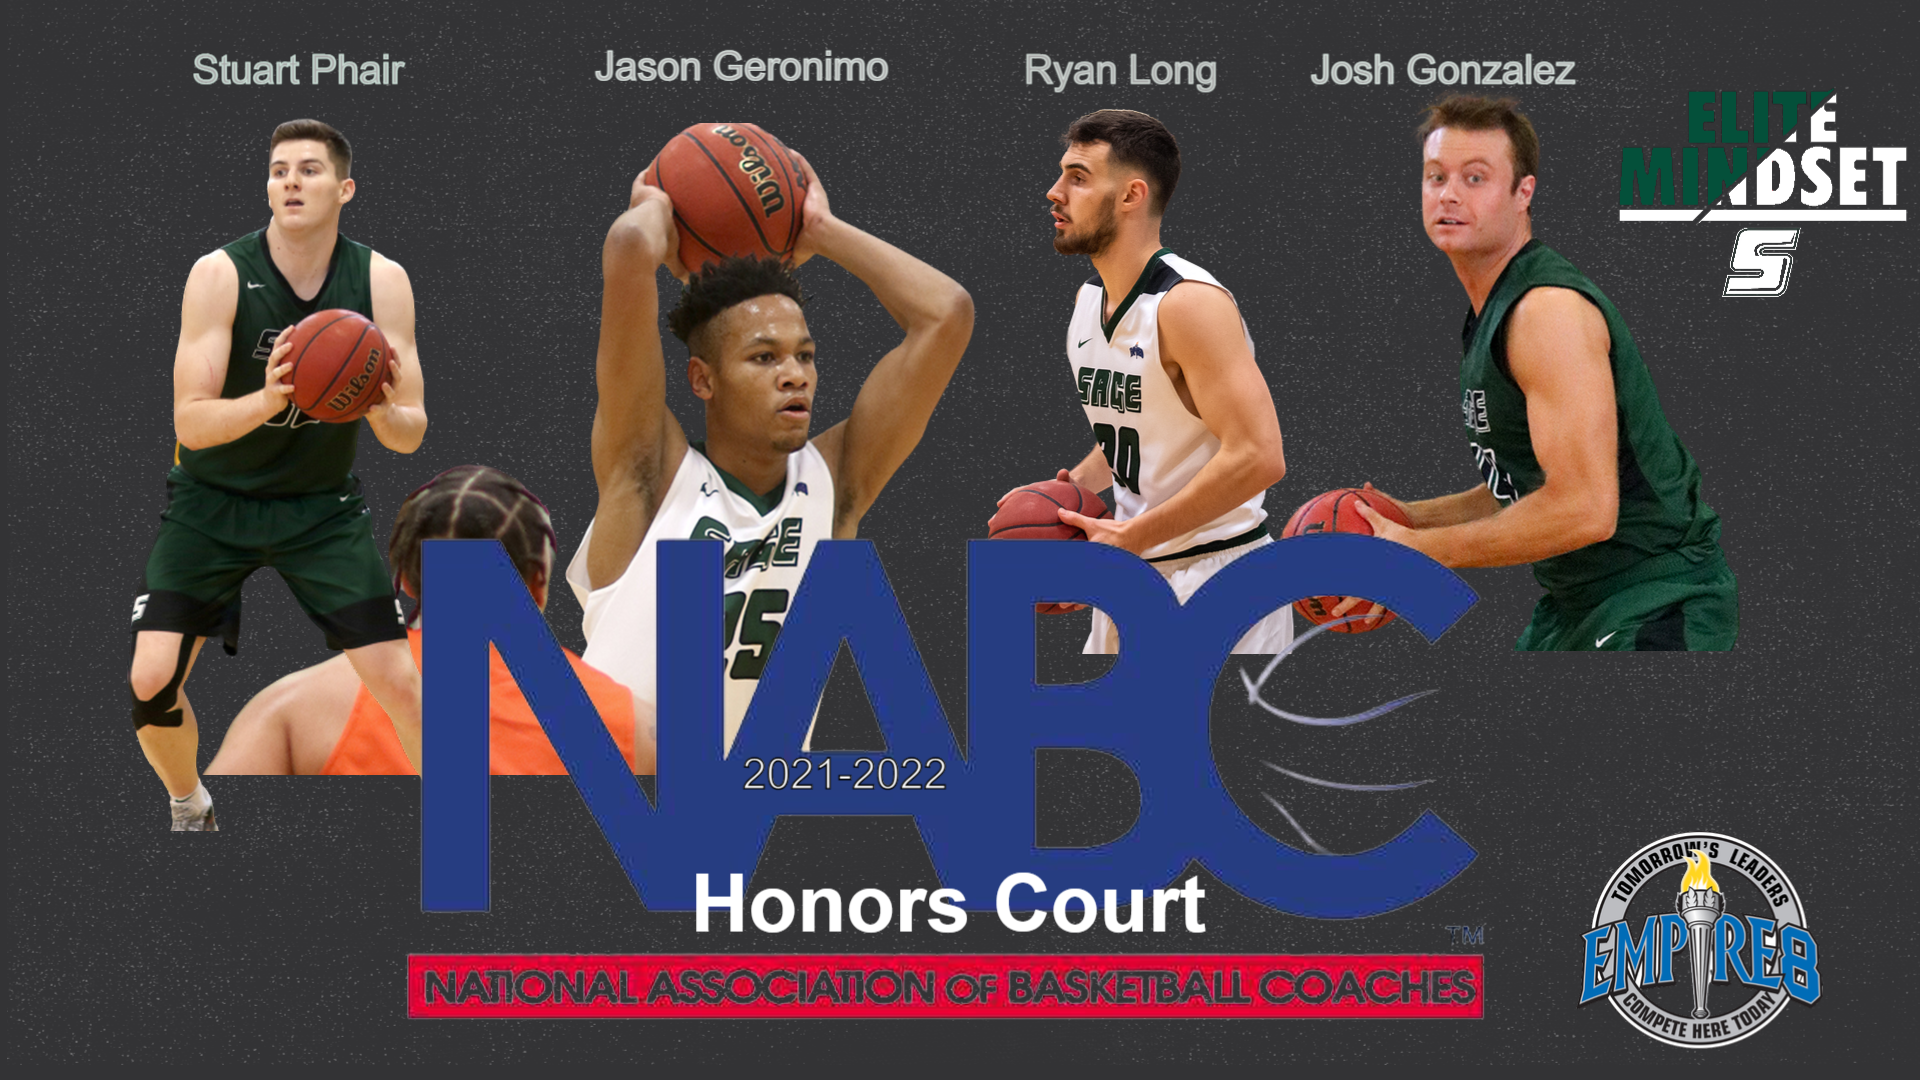 Four Gators named to NABC Honors Court